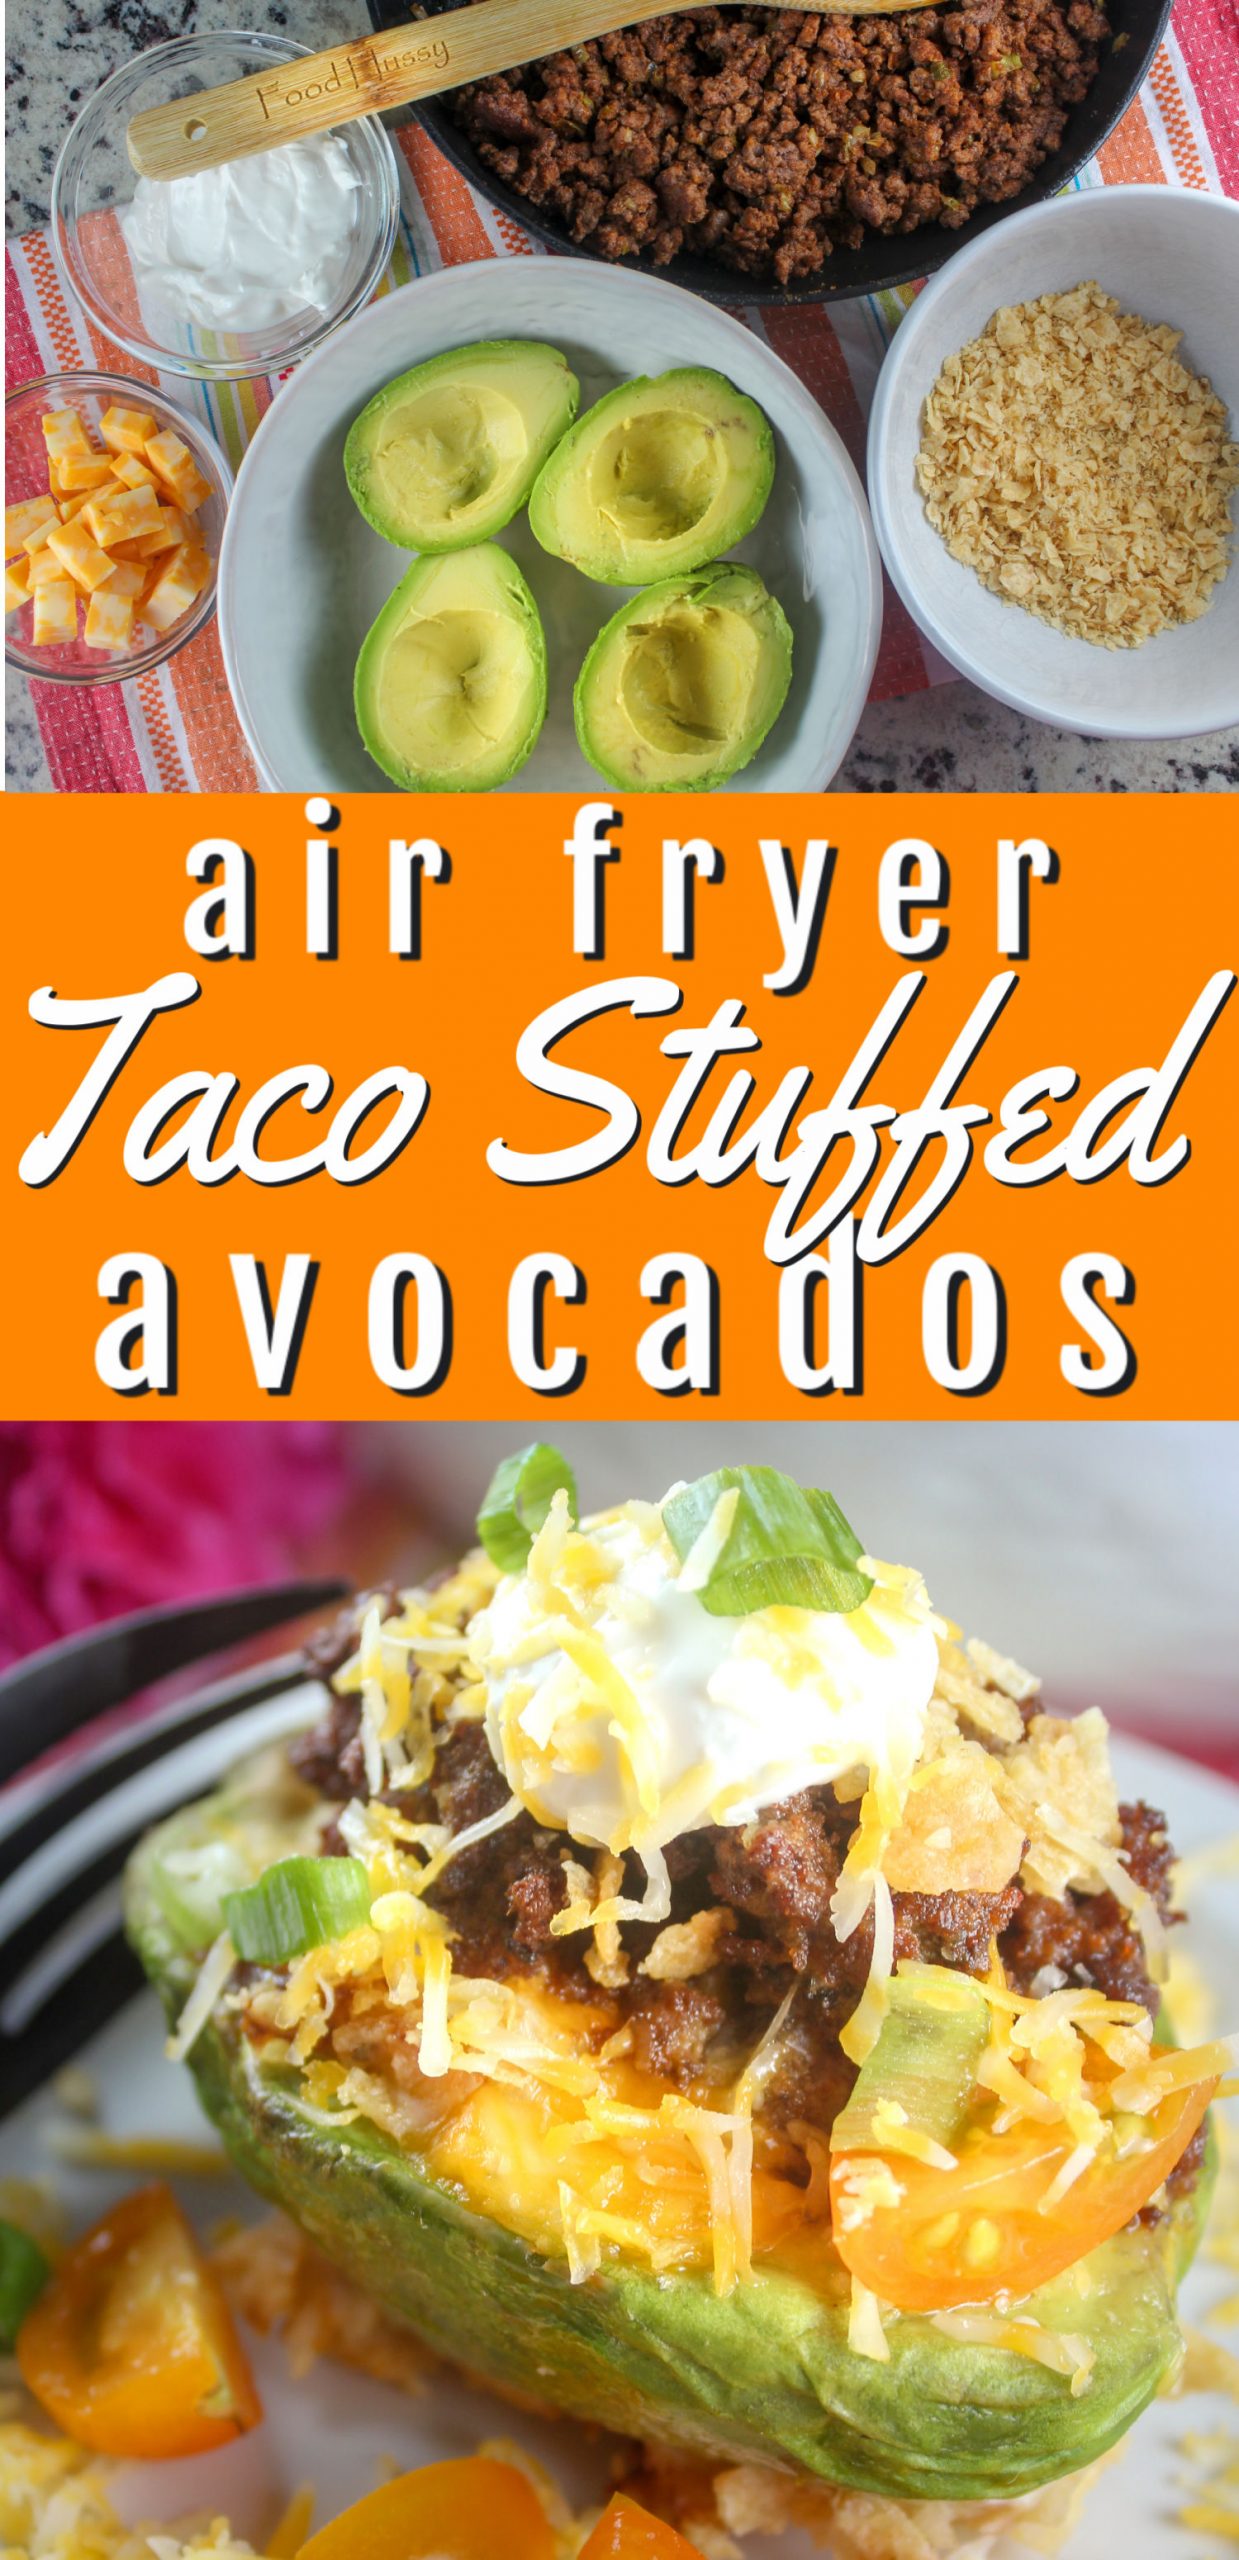 Taco Stuffed Avocados are a great dinner idea that the whole family will love and it's ready in less than 30 minutes! Creamy avocado filled with your favorite taco filling and dipped in crunchy tortilla chips! Yum!  via @foodhussy